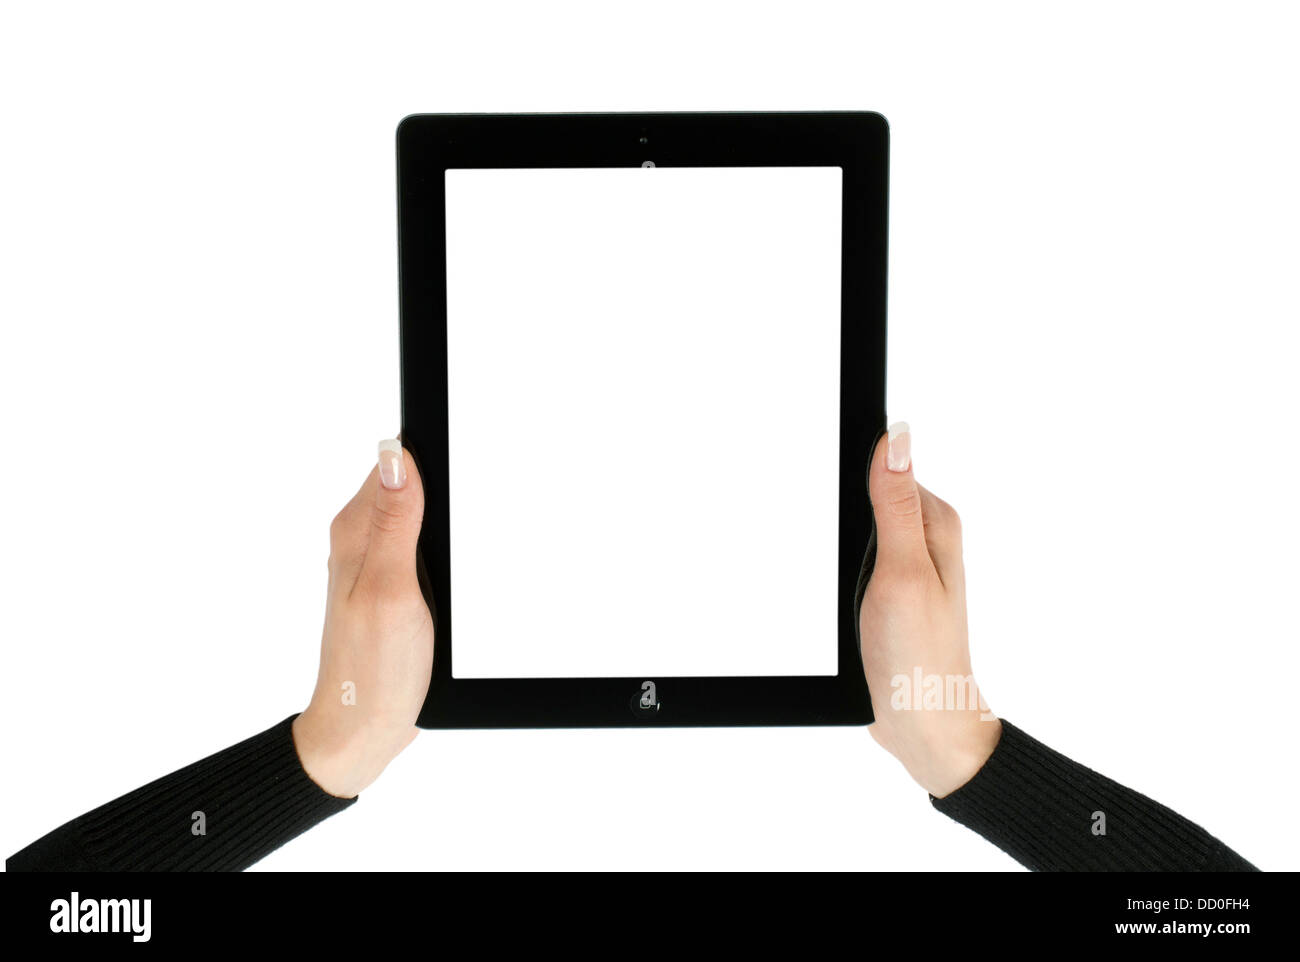 tablet computer Stock Photo